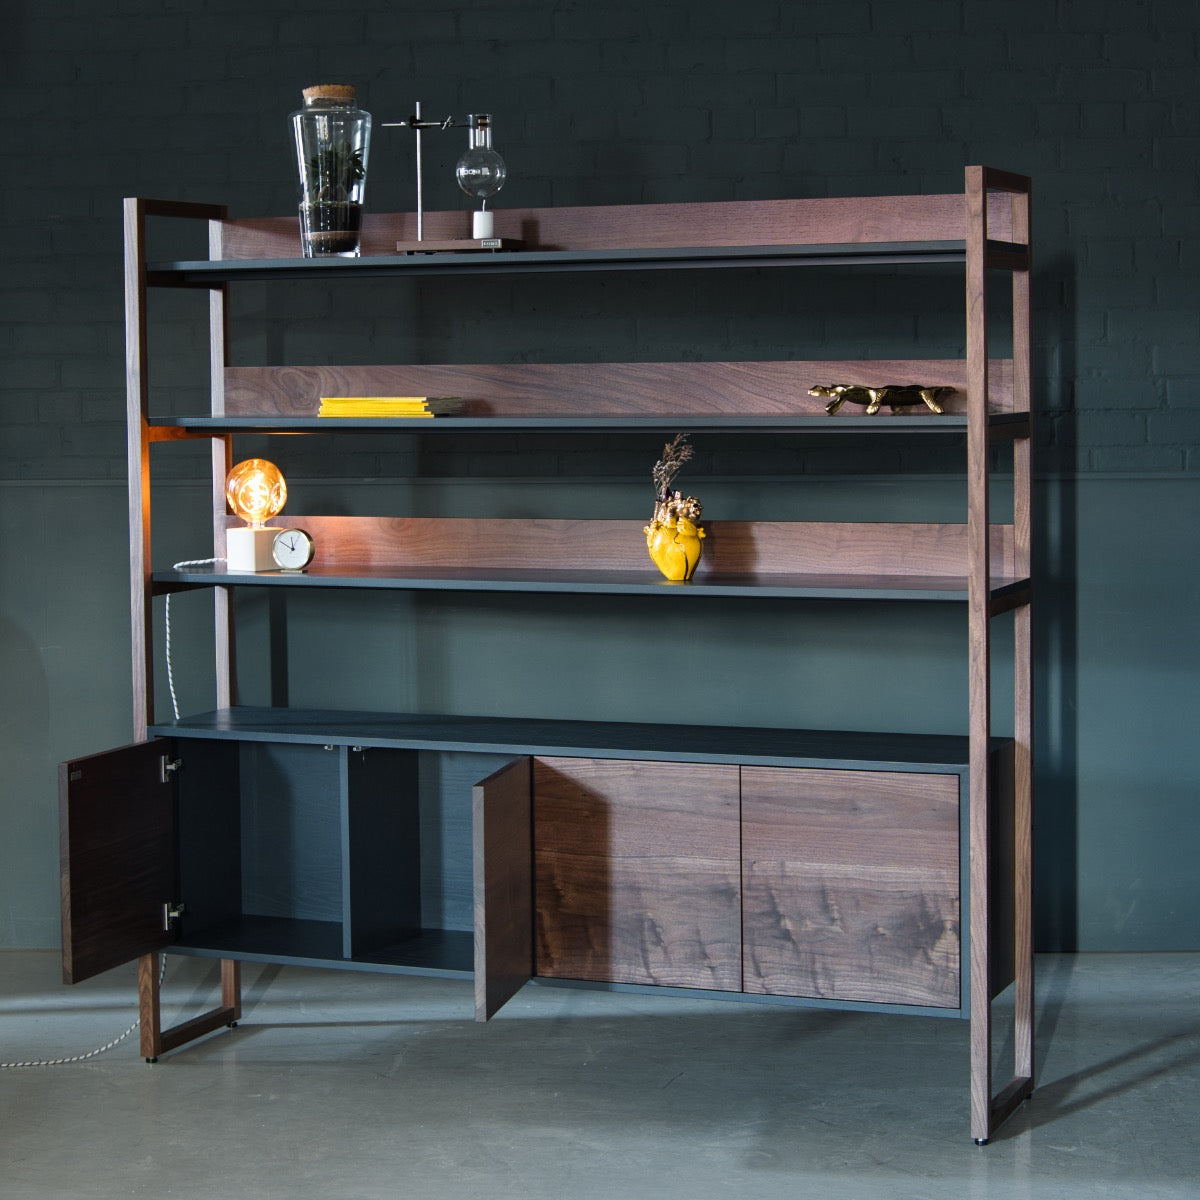 An image of the Walnut Shelving Unit, Ari product available from Koda Studios